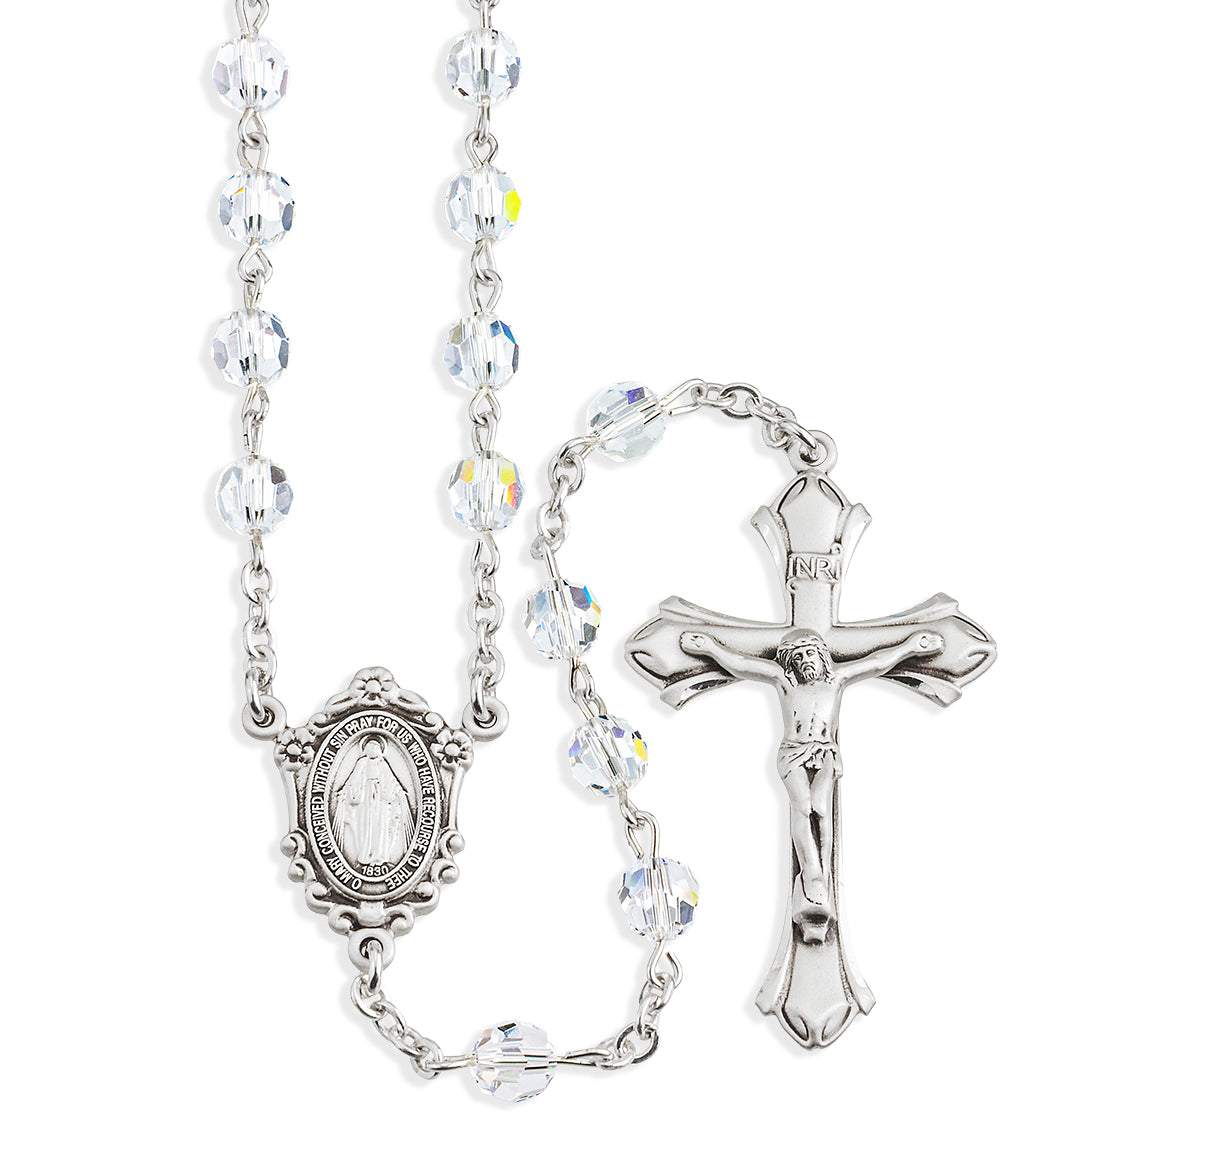 Rosary Sterling Crucifix and Centerpiece Created with Swarovski Crystal 6mm Faceted Round Clear Beads by HMH